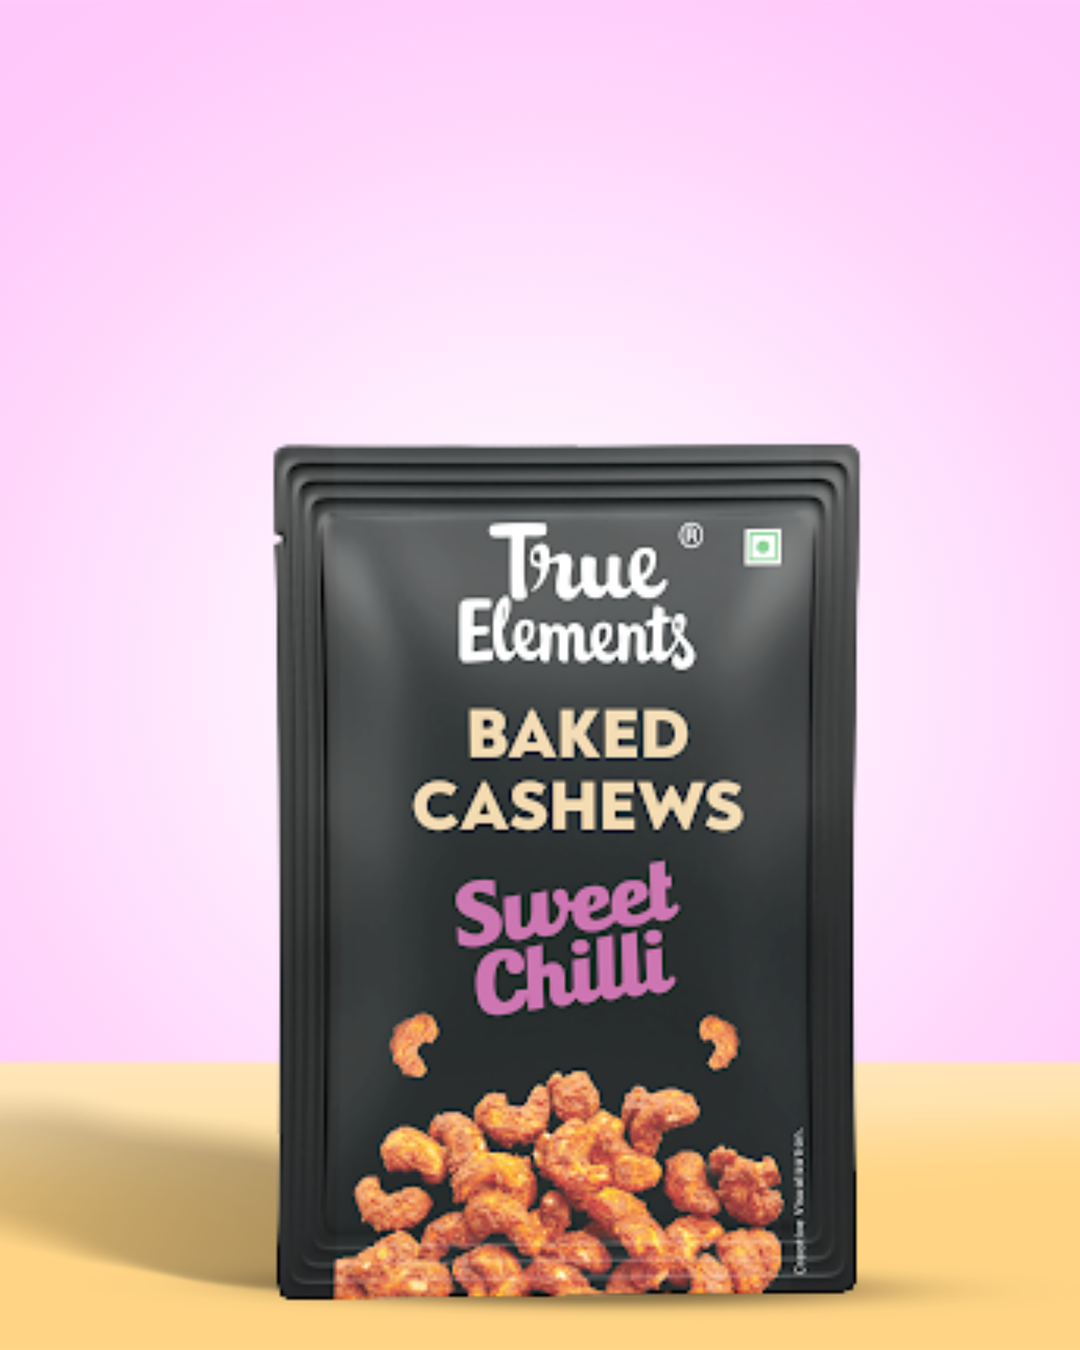 True Elements Baked Cashews Sweet Chilli 14gm Dry Fruits.